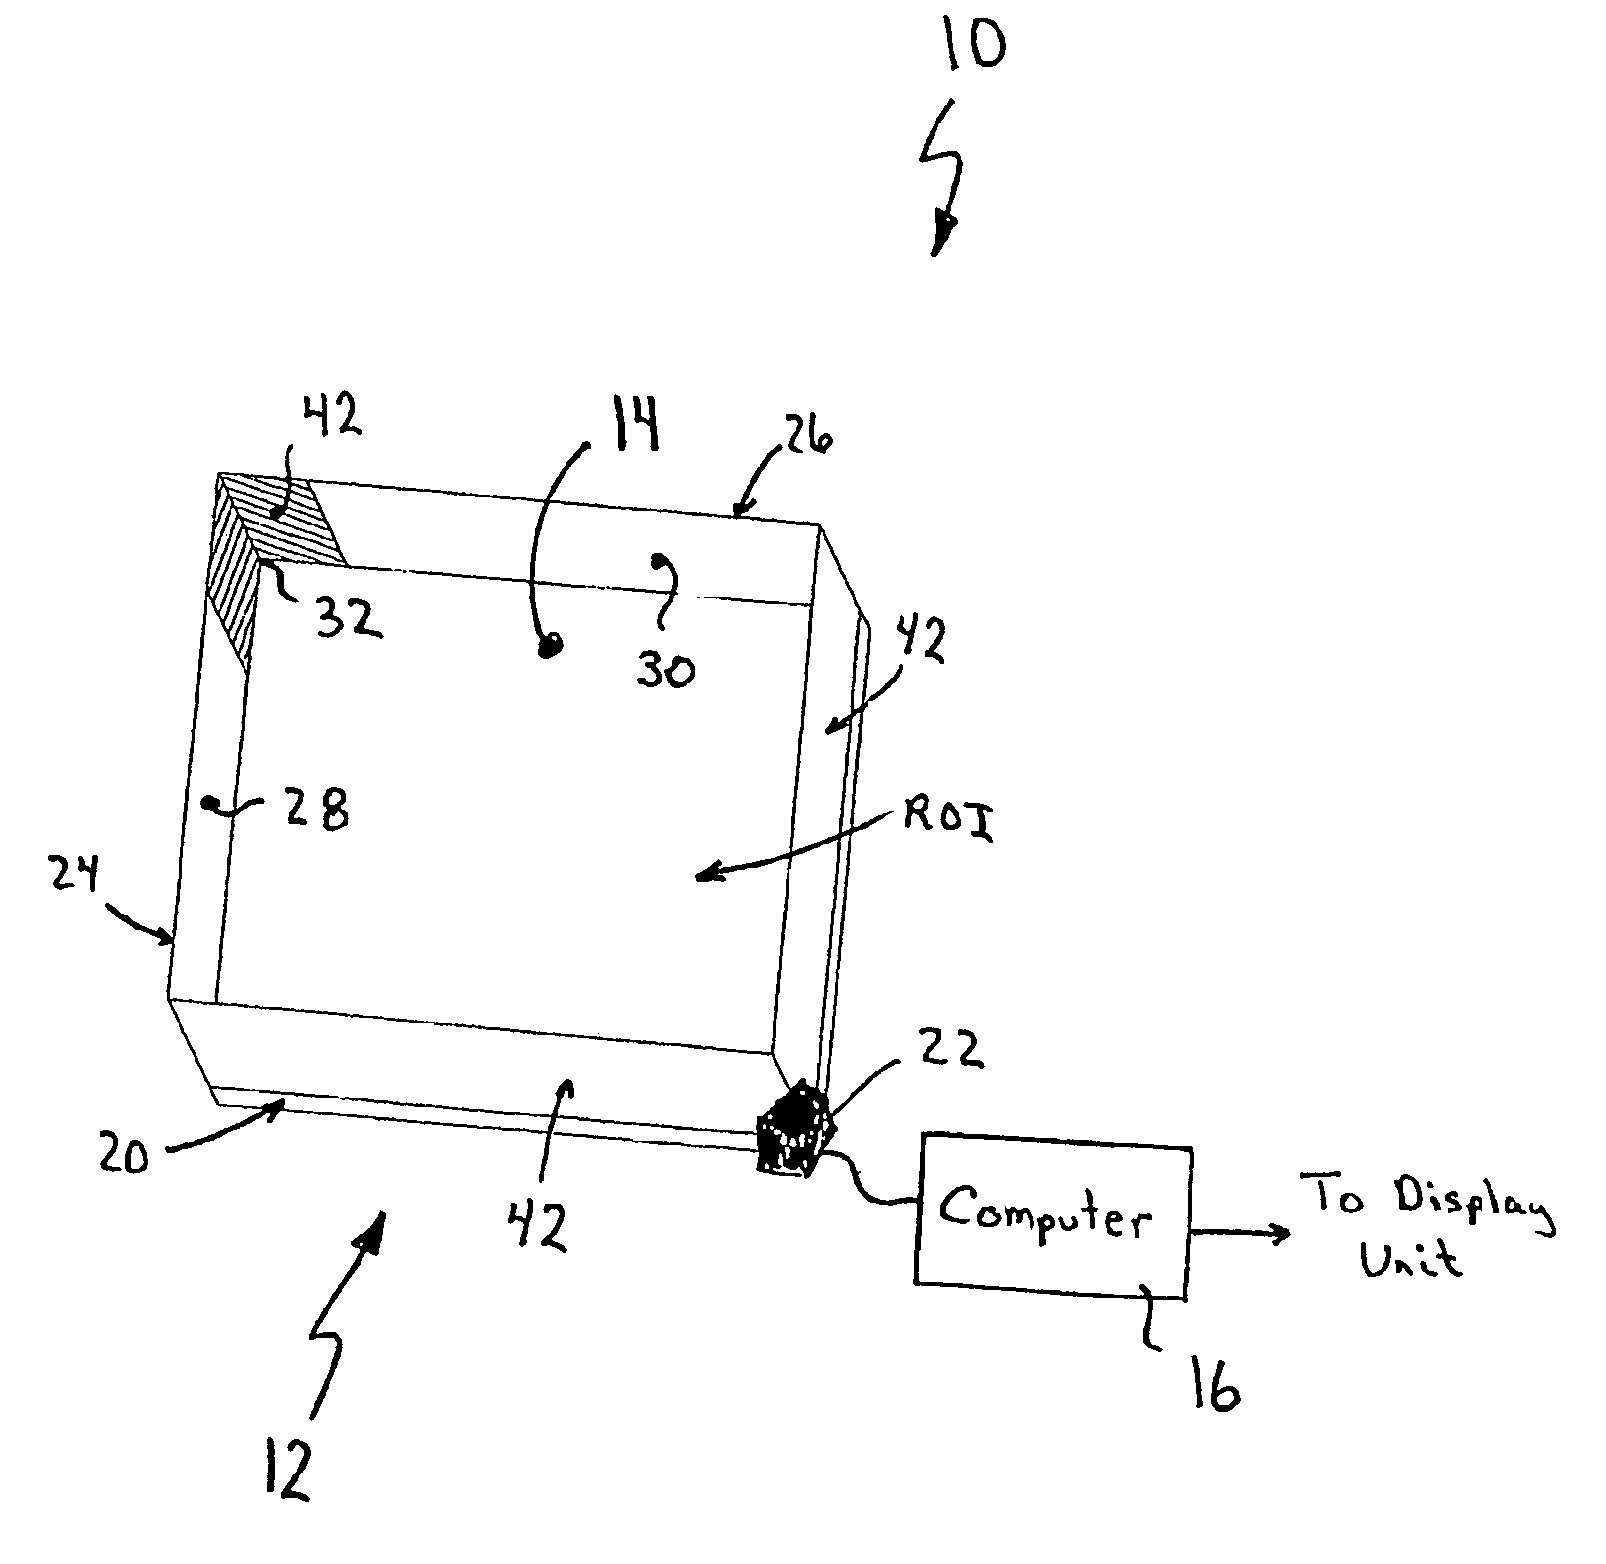 Apparatus for determining the location of a pointer within a region of interest